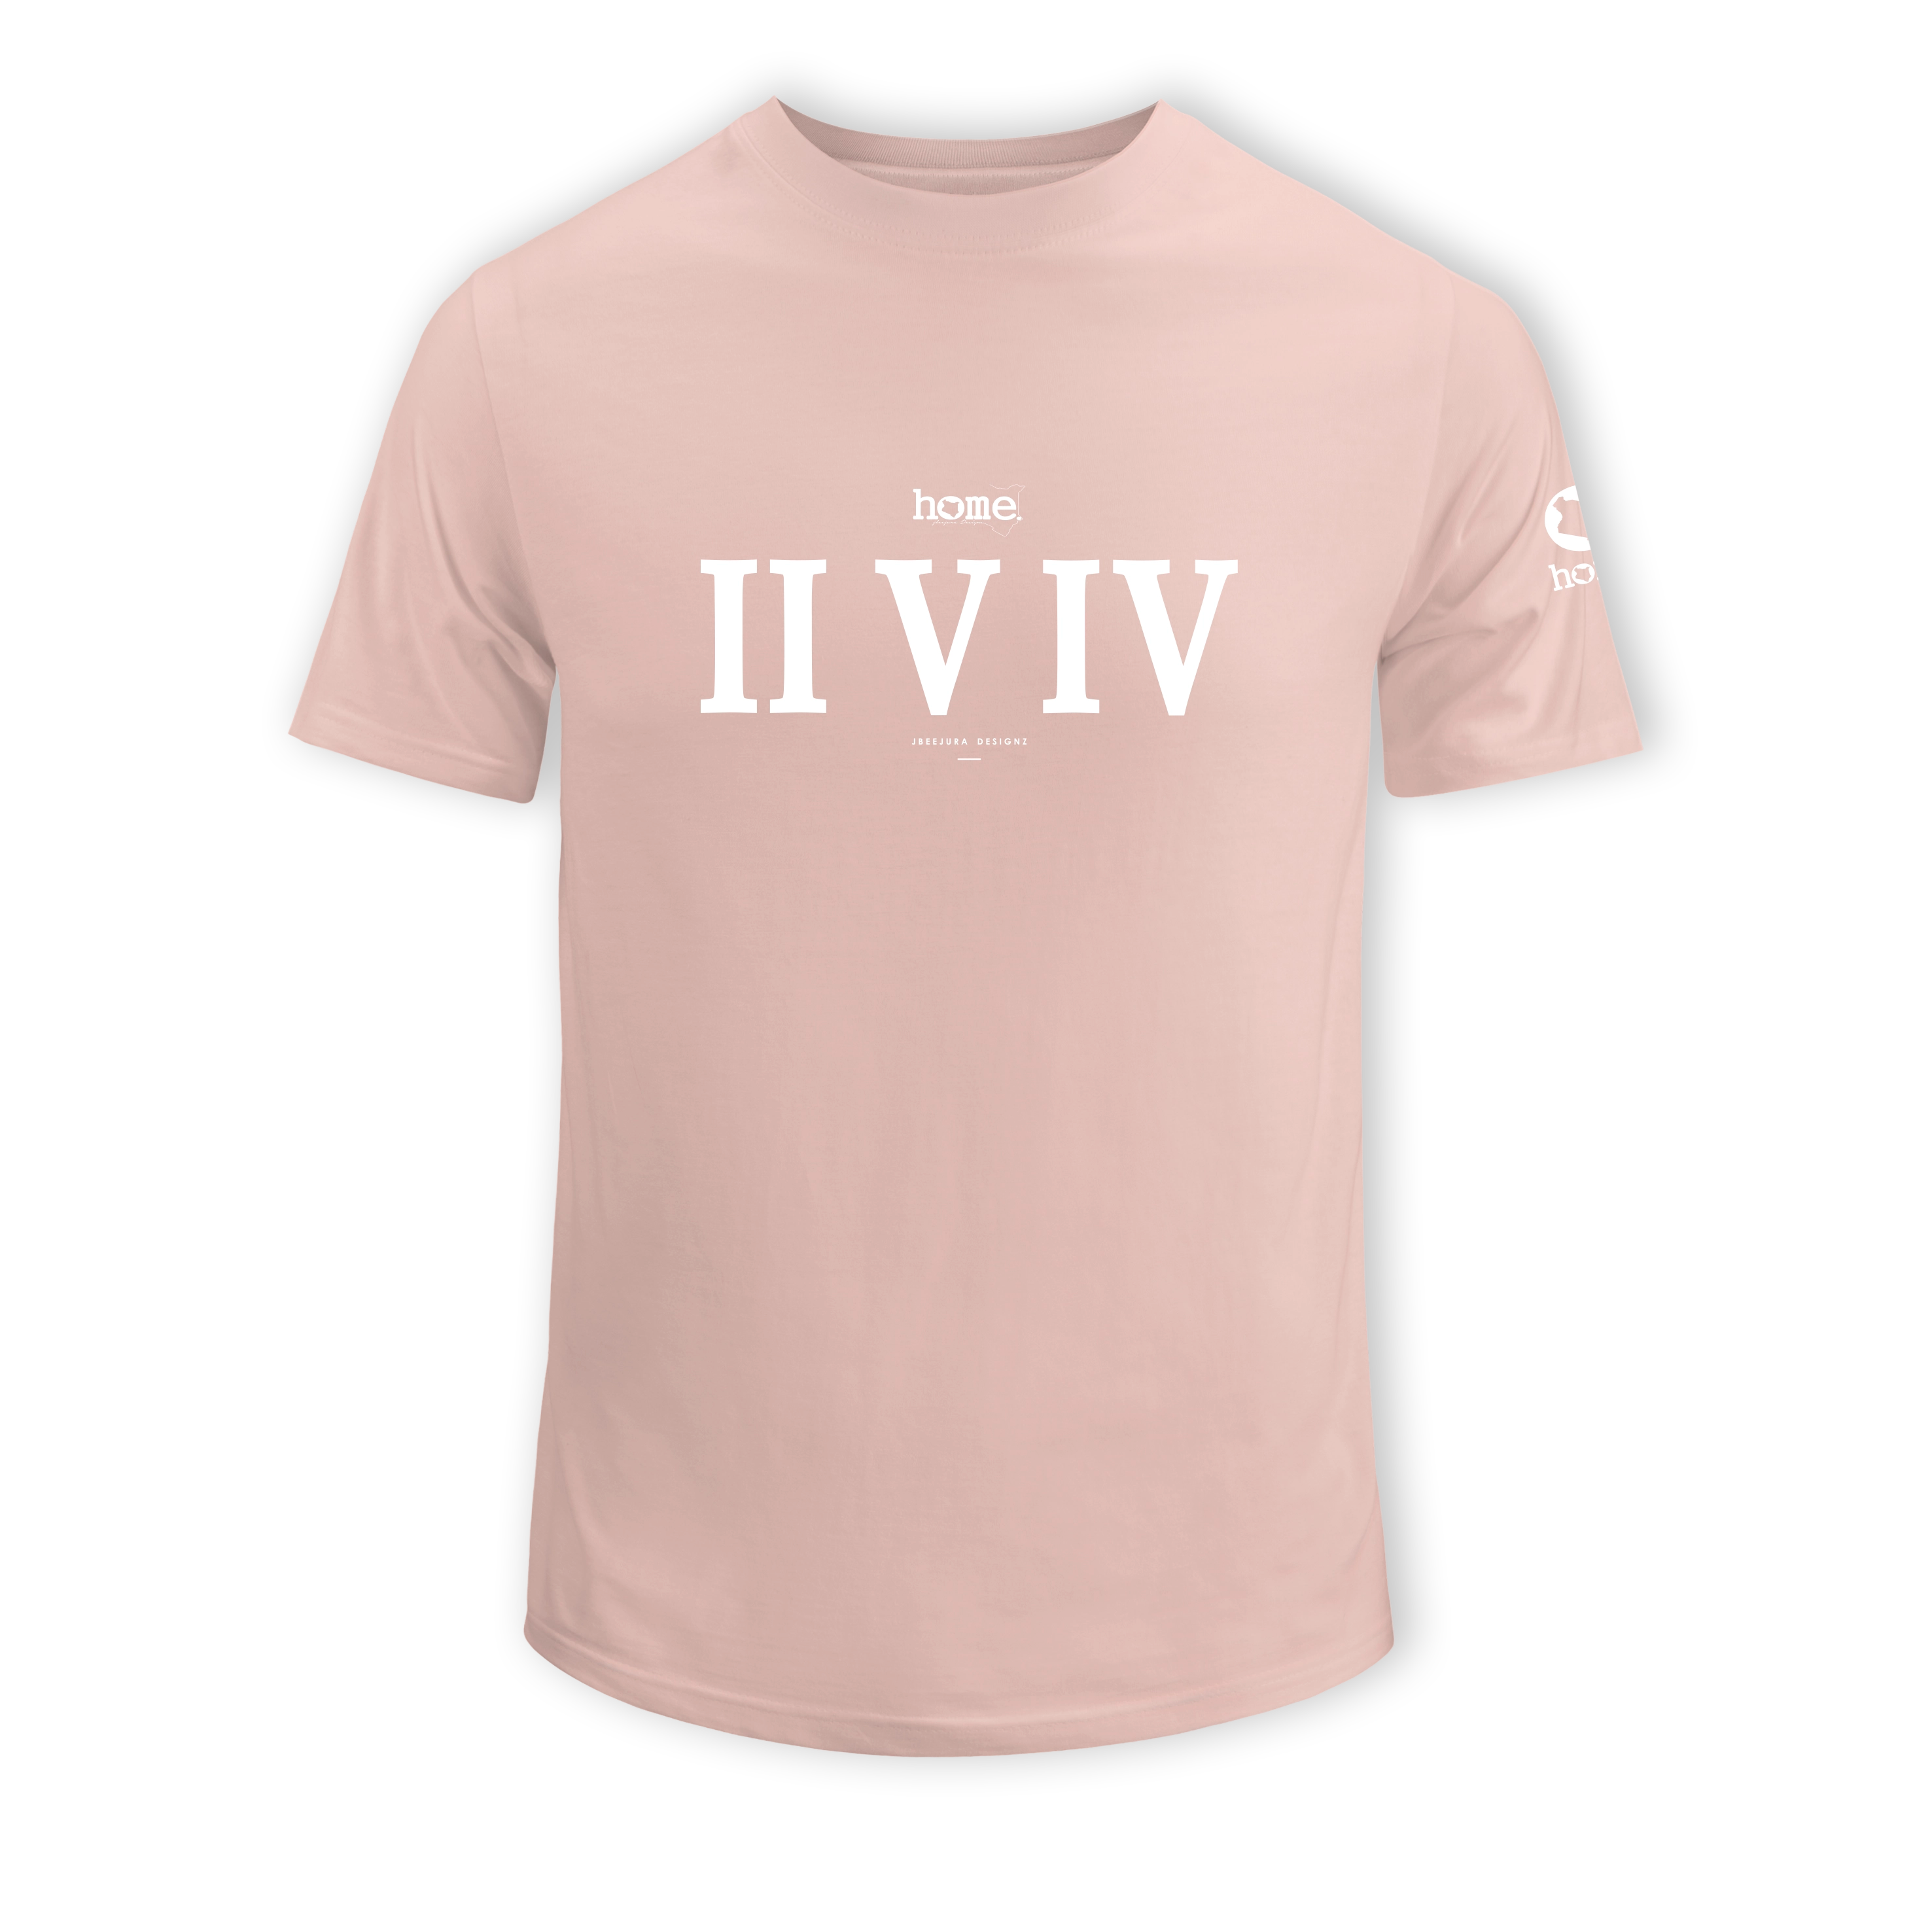 home_254 SHORT-SLEEVED PEACH T-SHIRT WITH A WHITE ROMAN NUMERALS PRINT – COTTON PLUS FABRIC